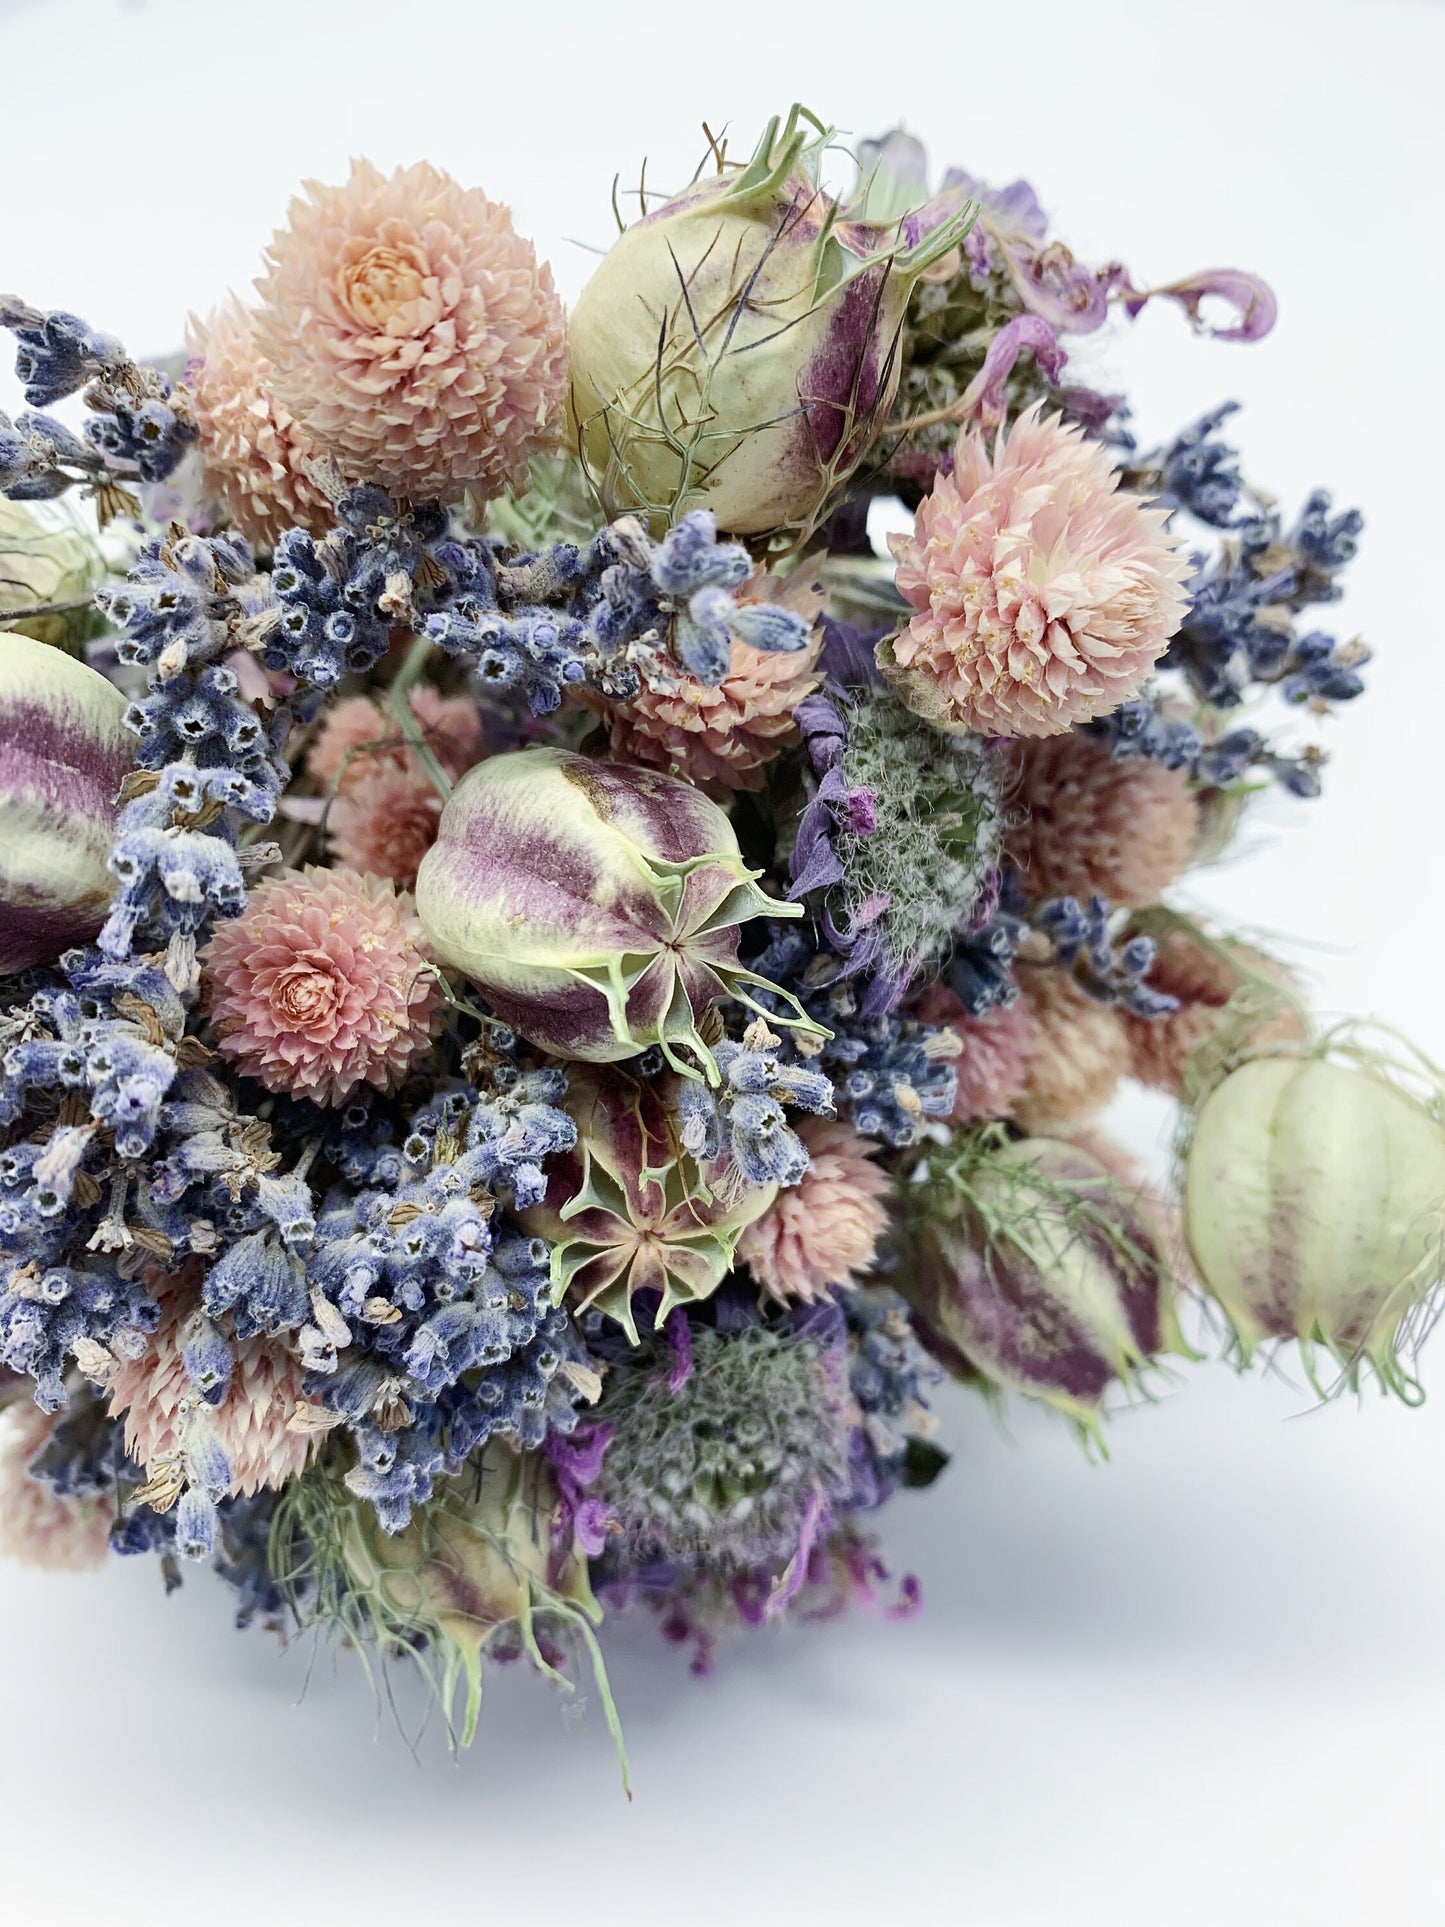 Spring Collection, Bouquet, Natural Flowers, Dried Flowers, Bridal, Wedding, Floral, Colorful, Bridesmaid, pink, blue, purple, amaranth